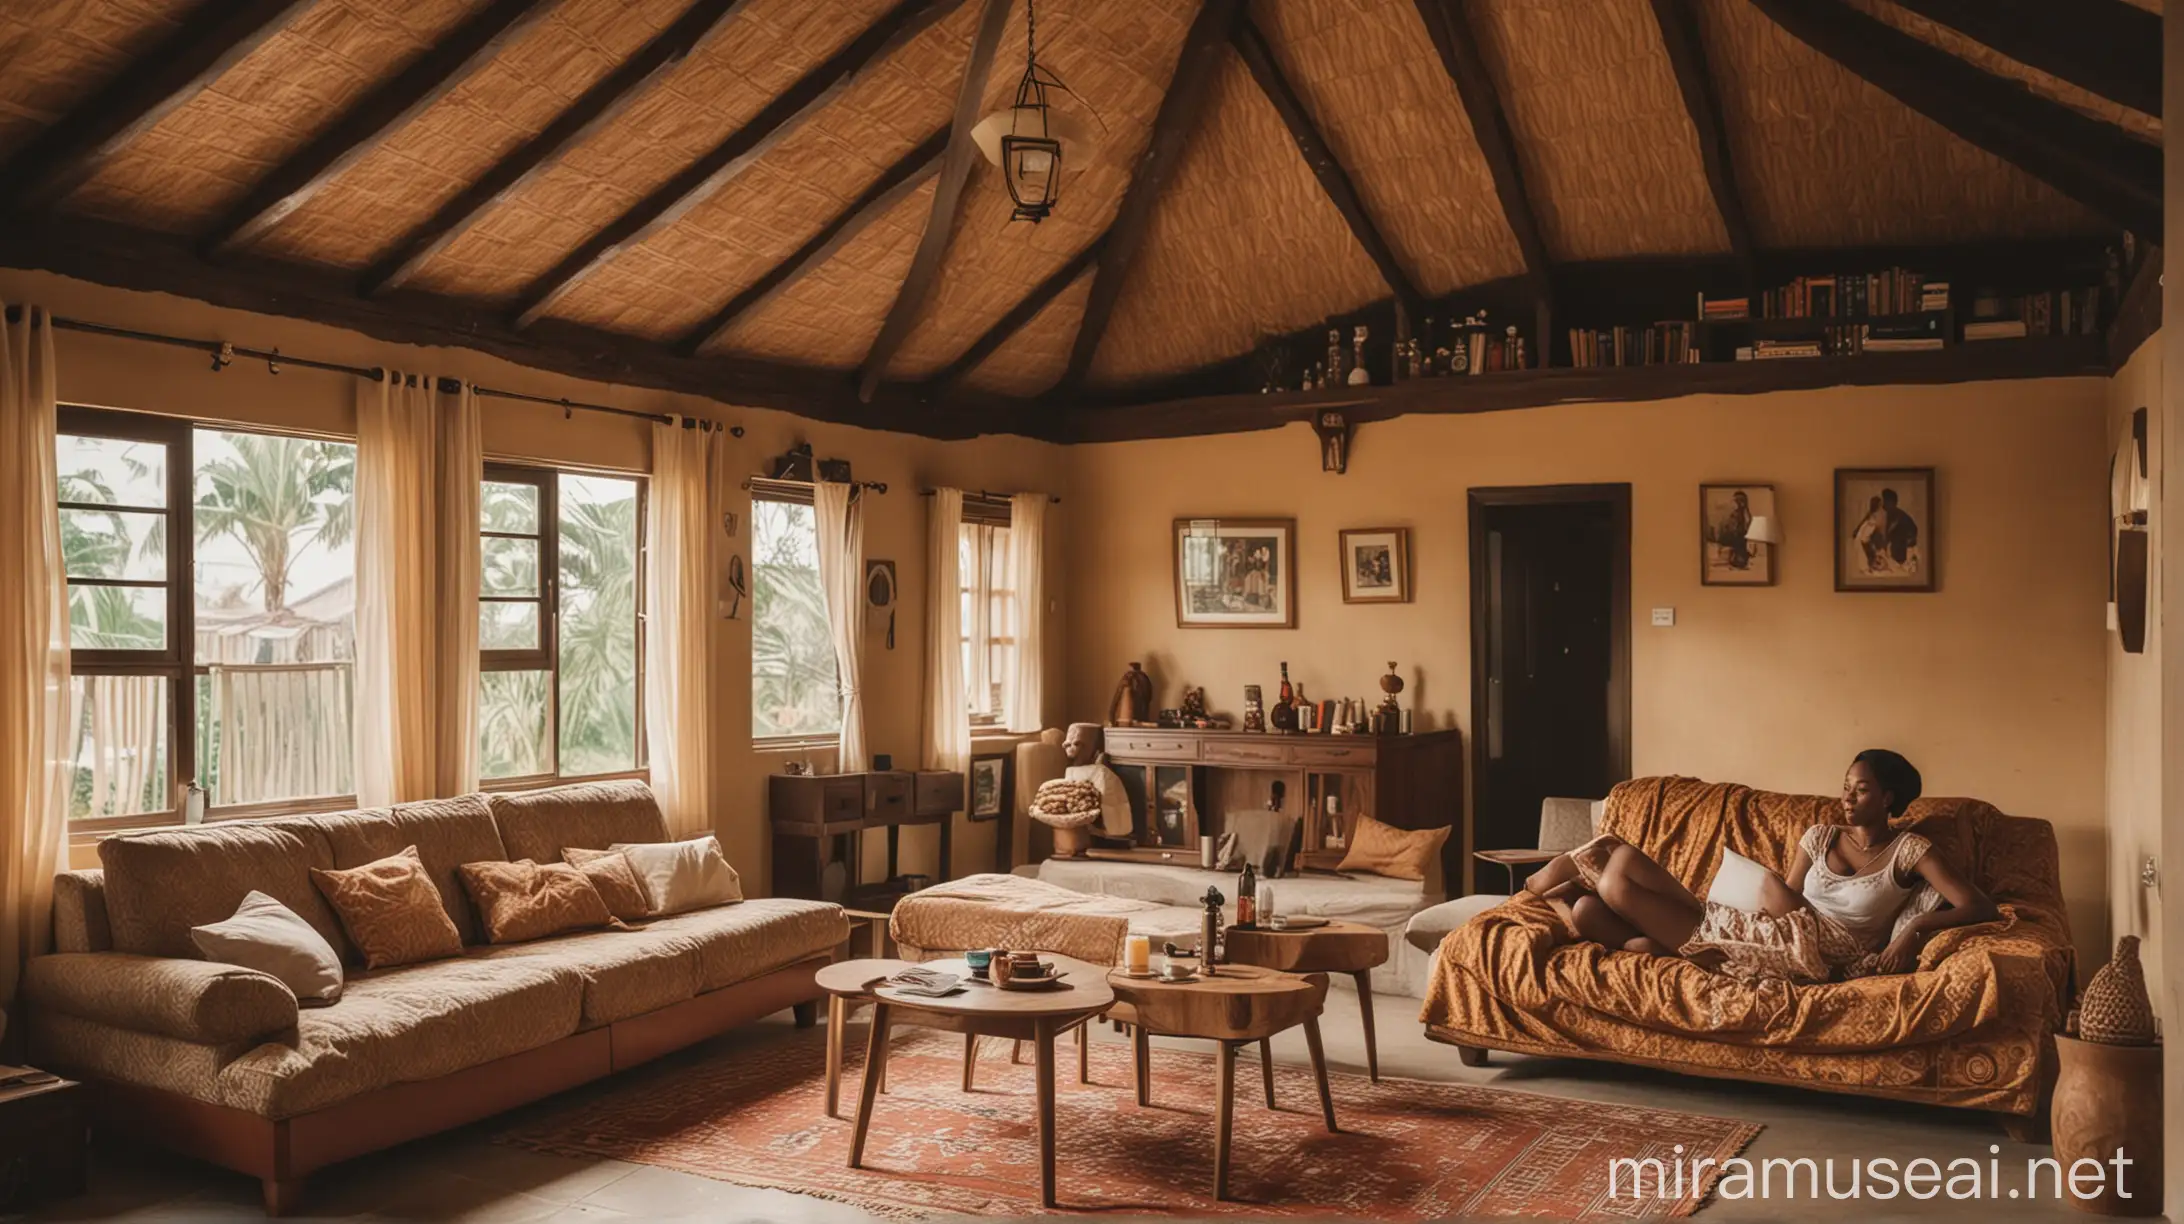 A bungalow of a Nigerian depicting singlehood, coziness and cultural diversity without being overloaded